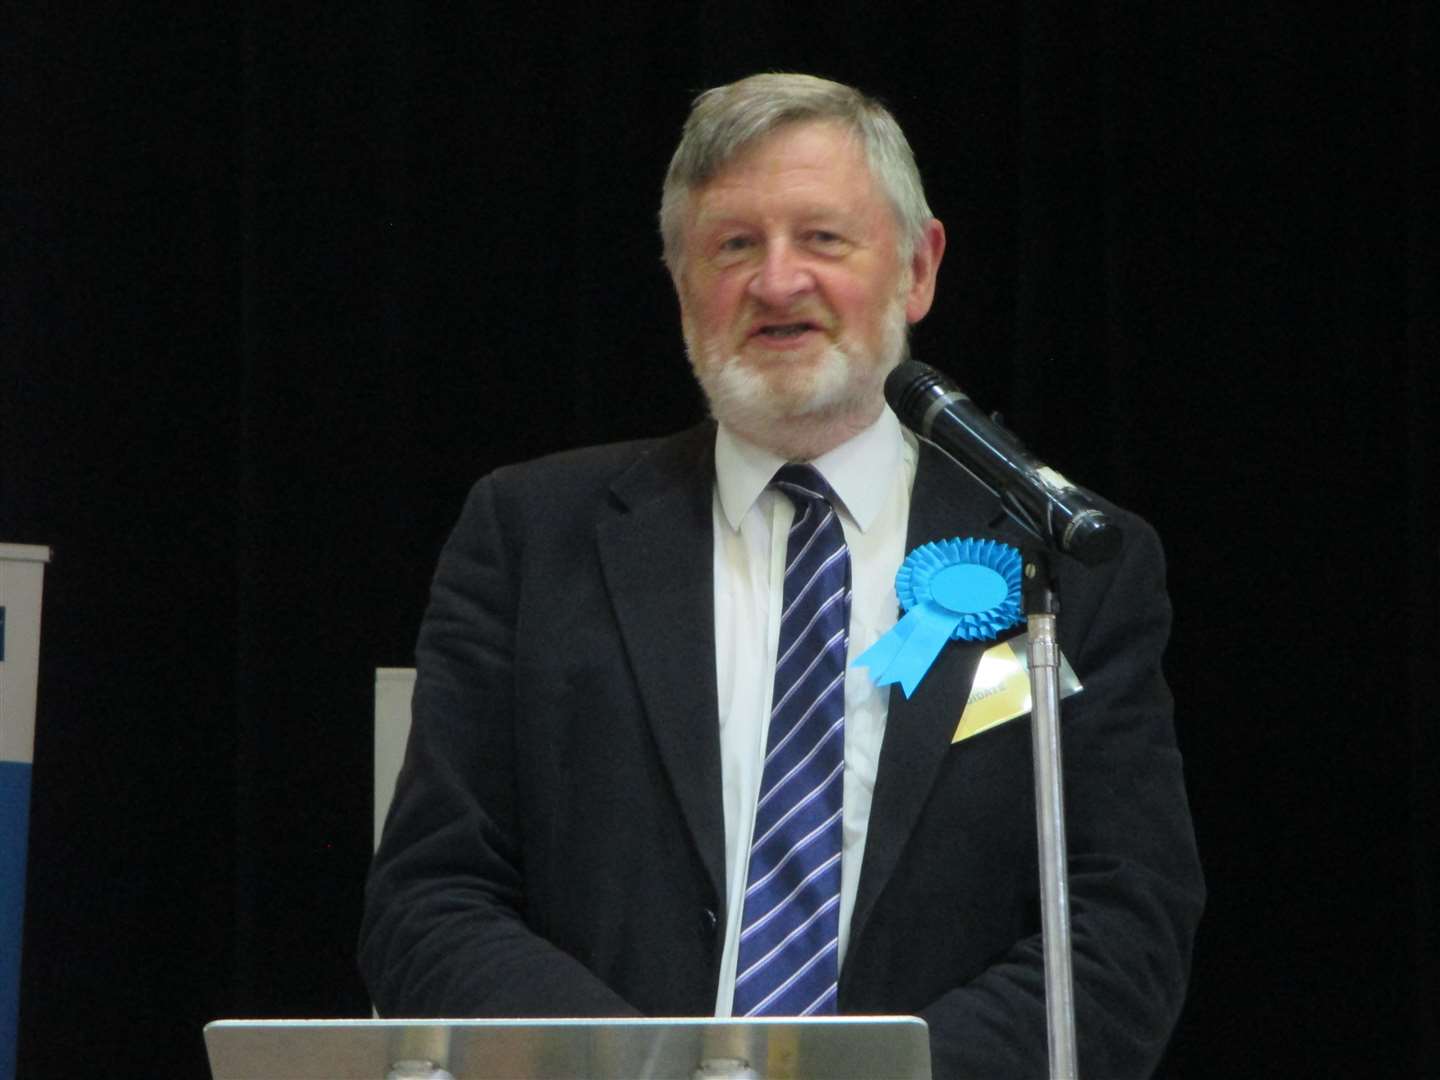 David Keating of the Scottish Conservatives won the East Garioch by-election